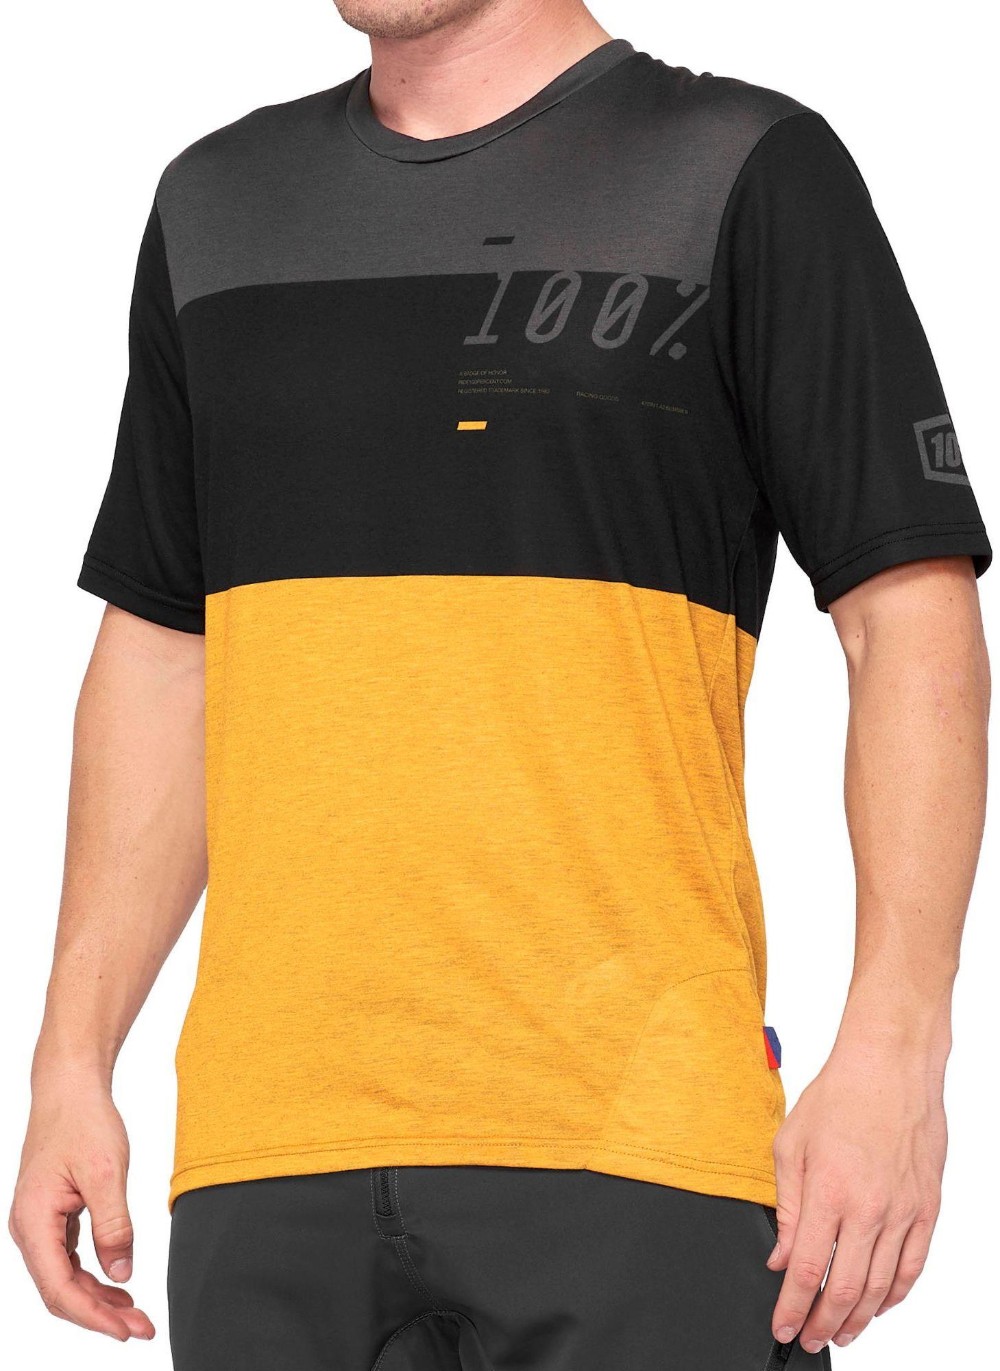 Airmatic Short Sleeve Jersey image 0